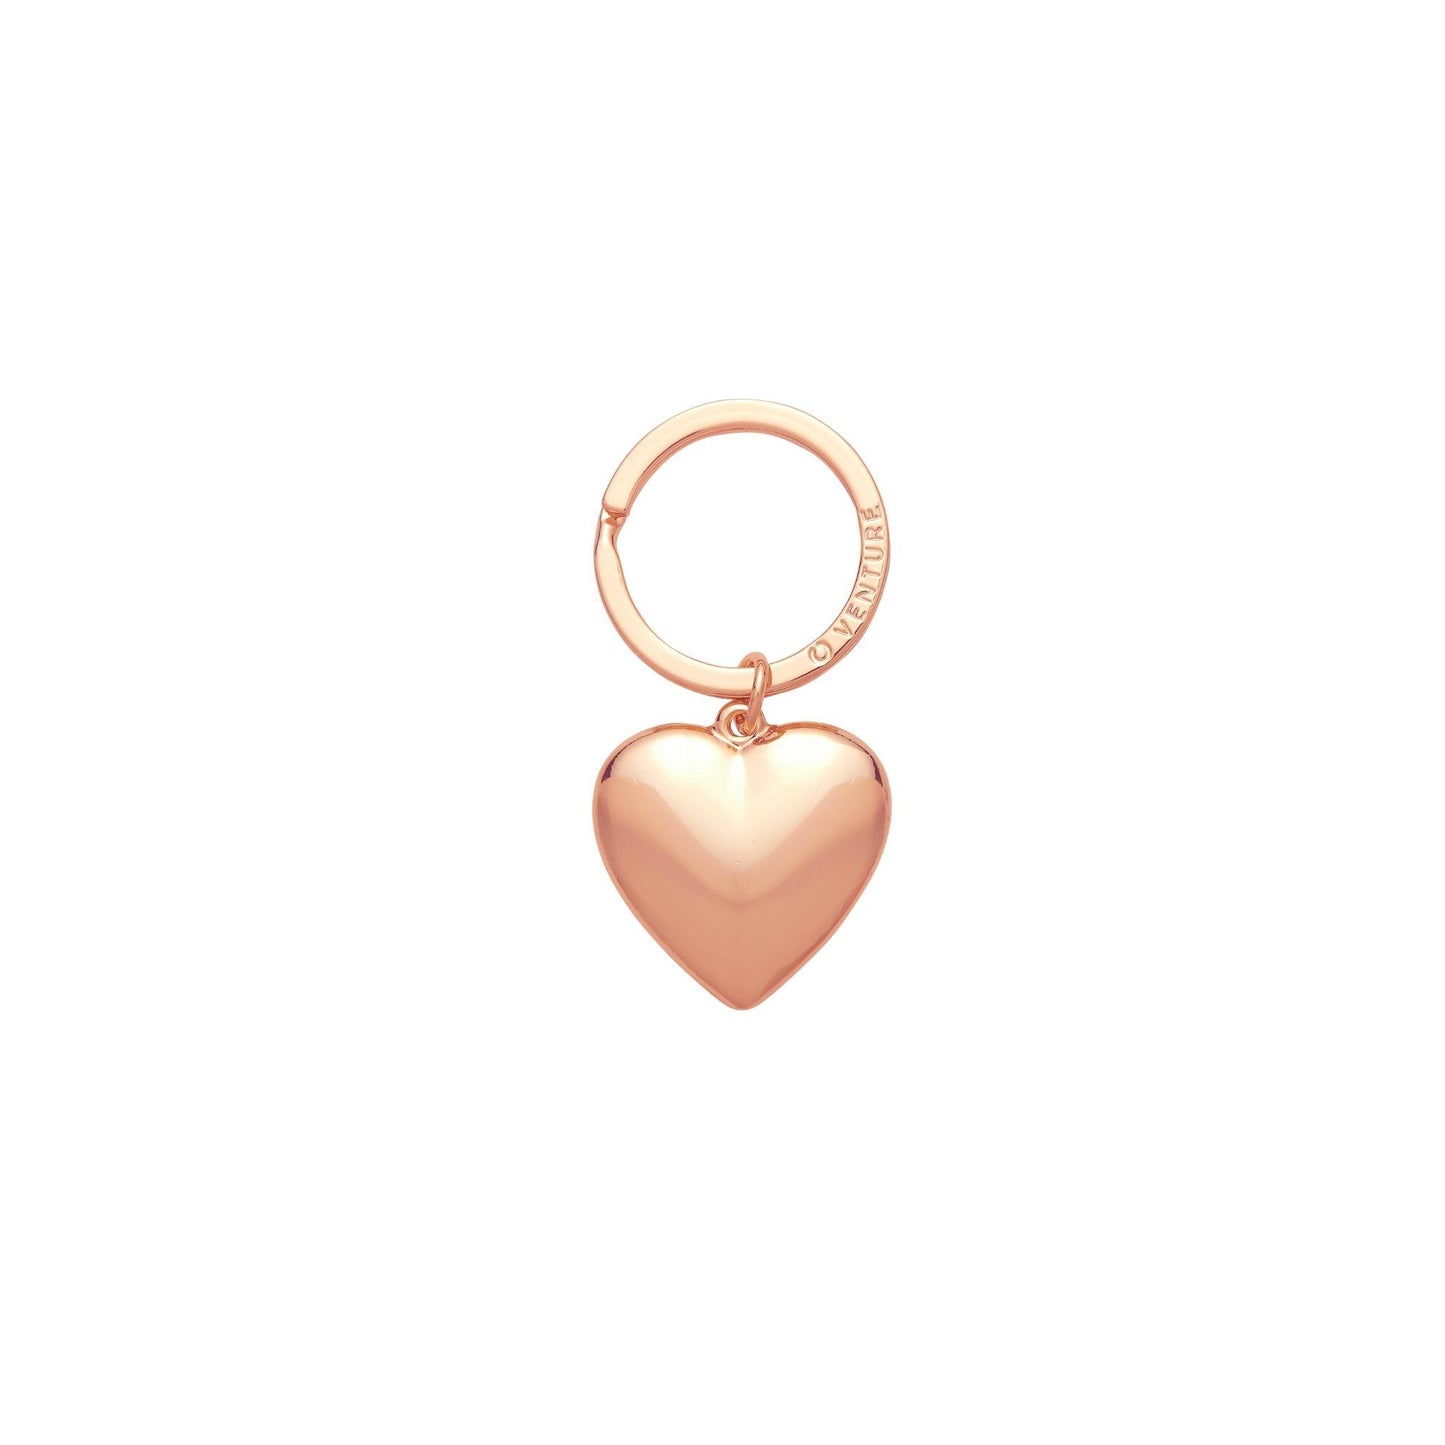 Rose gold puffy heart key chain. This charm can be added to the big o key ring in rose gold